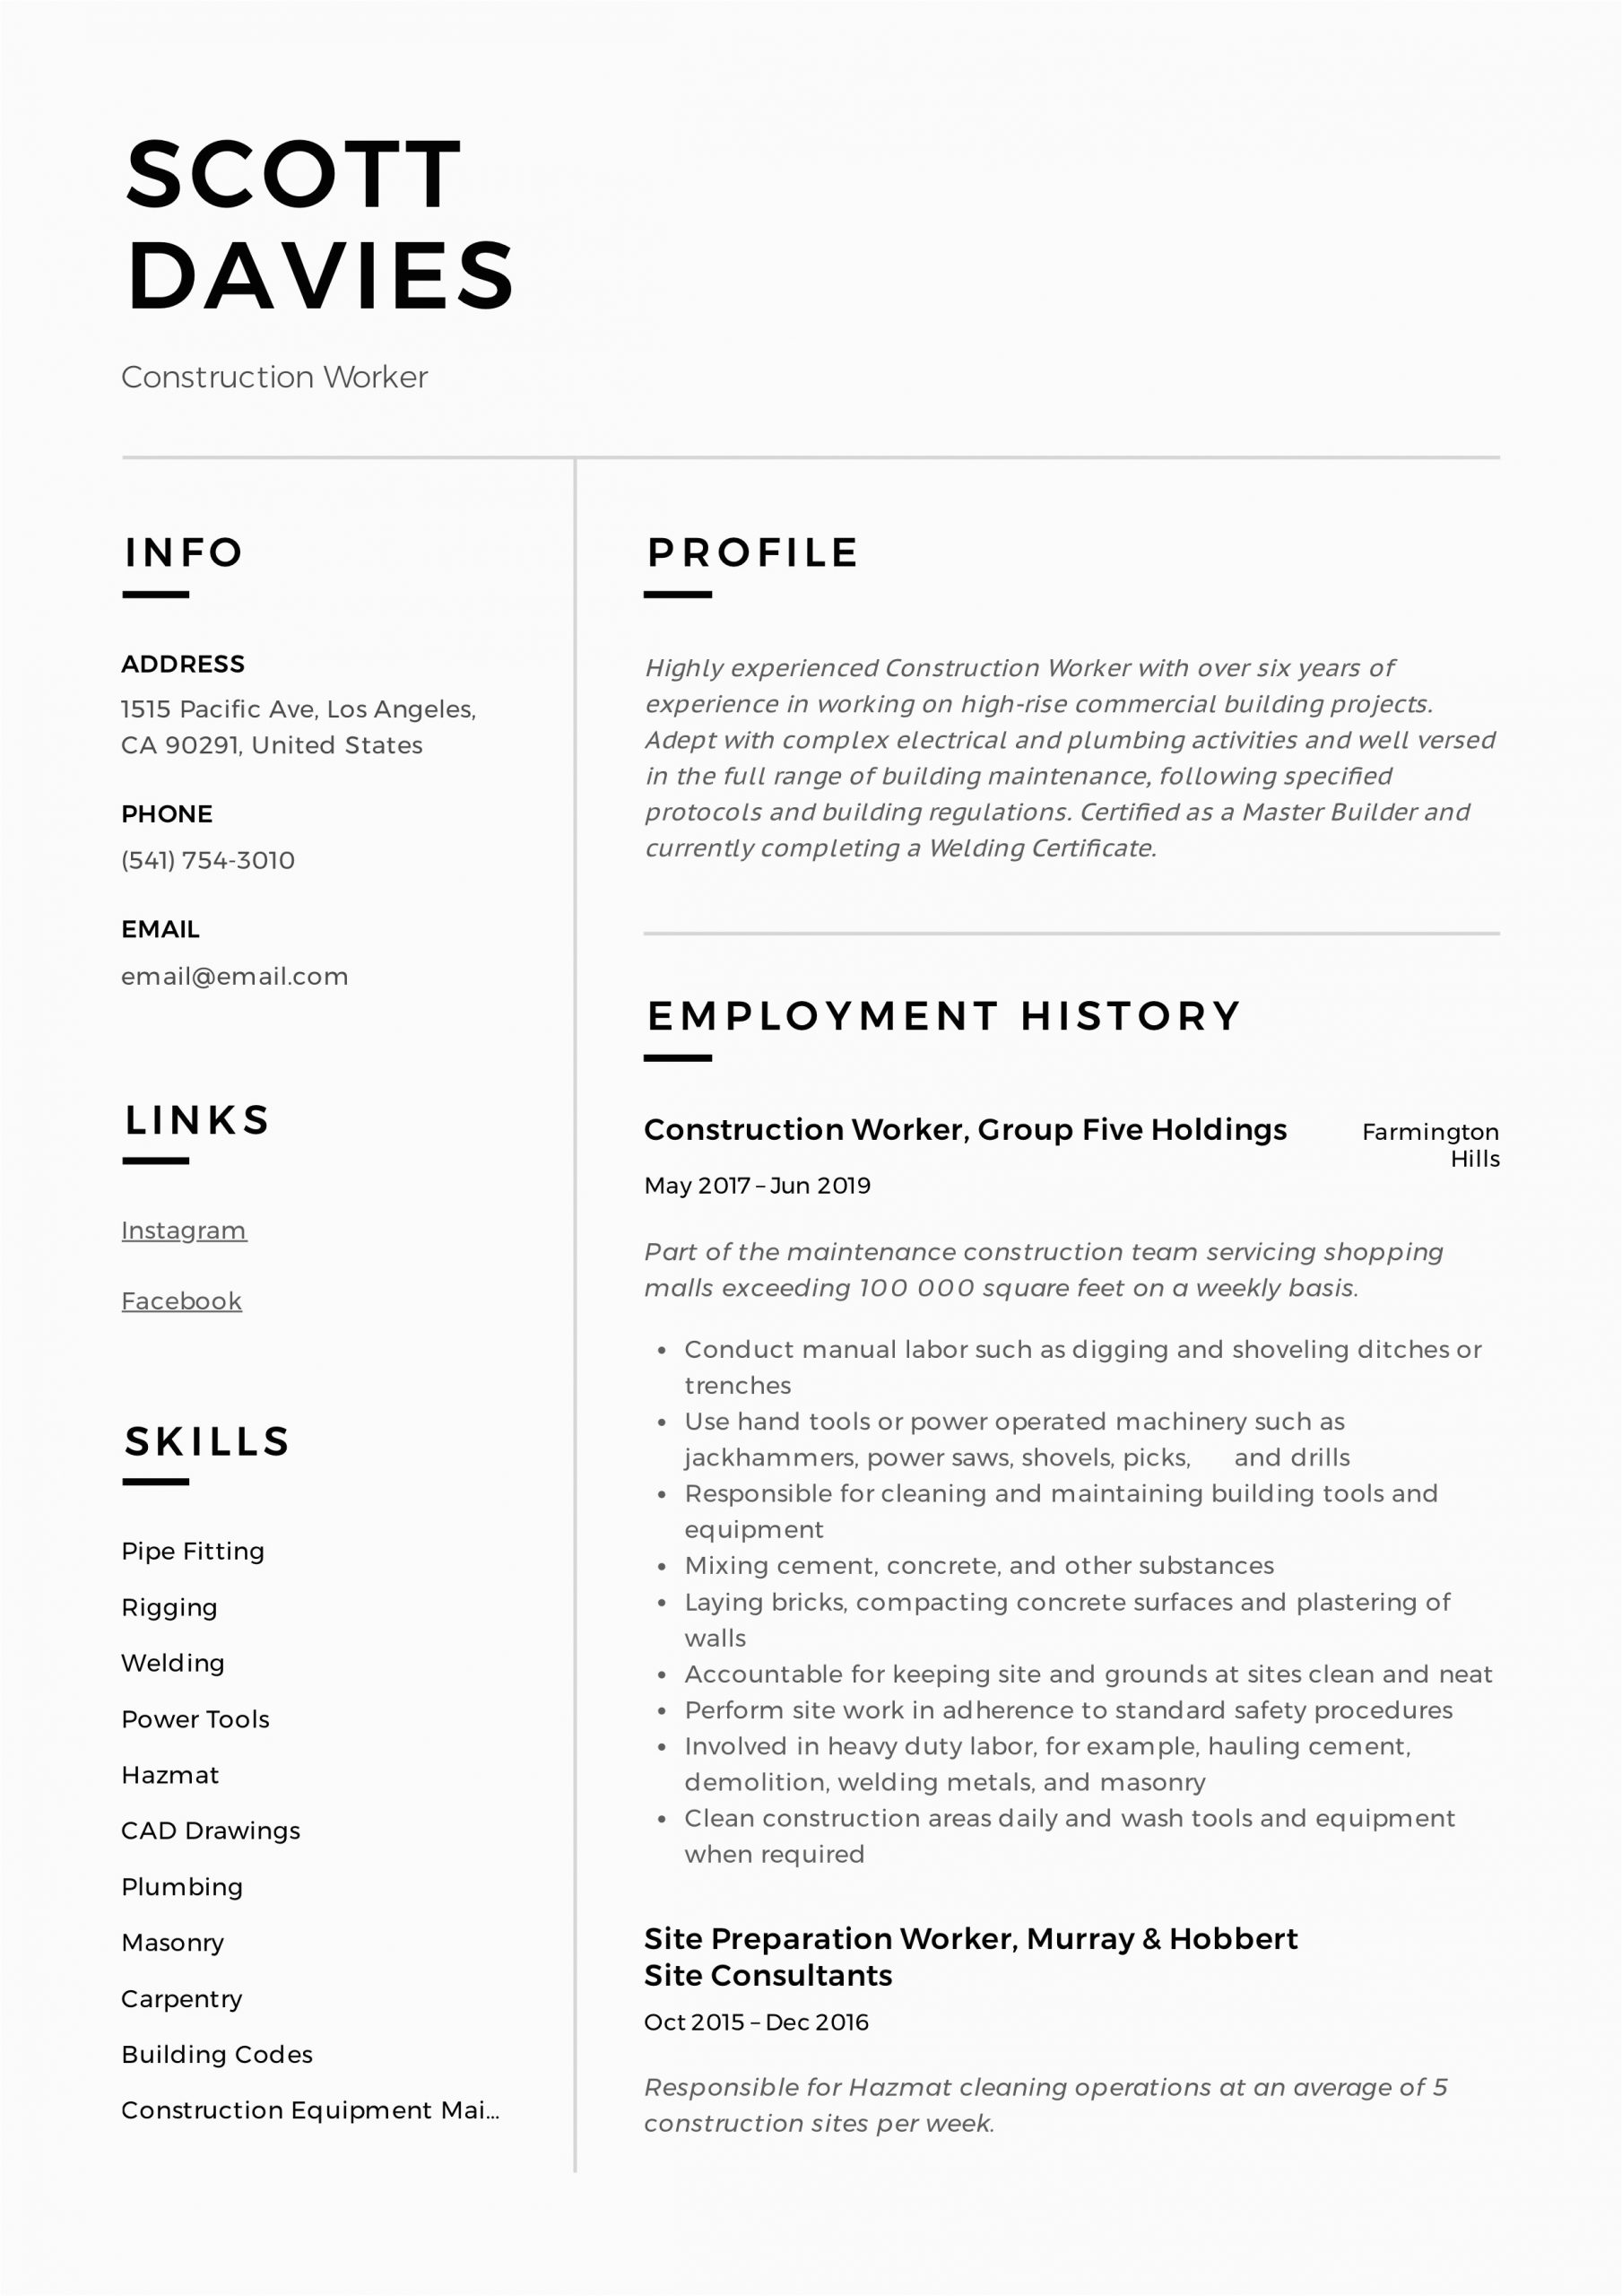 Construction Worker Resume Examples and Samples Construction Worker Resume & Writing Guide